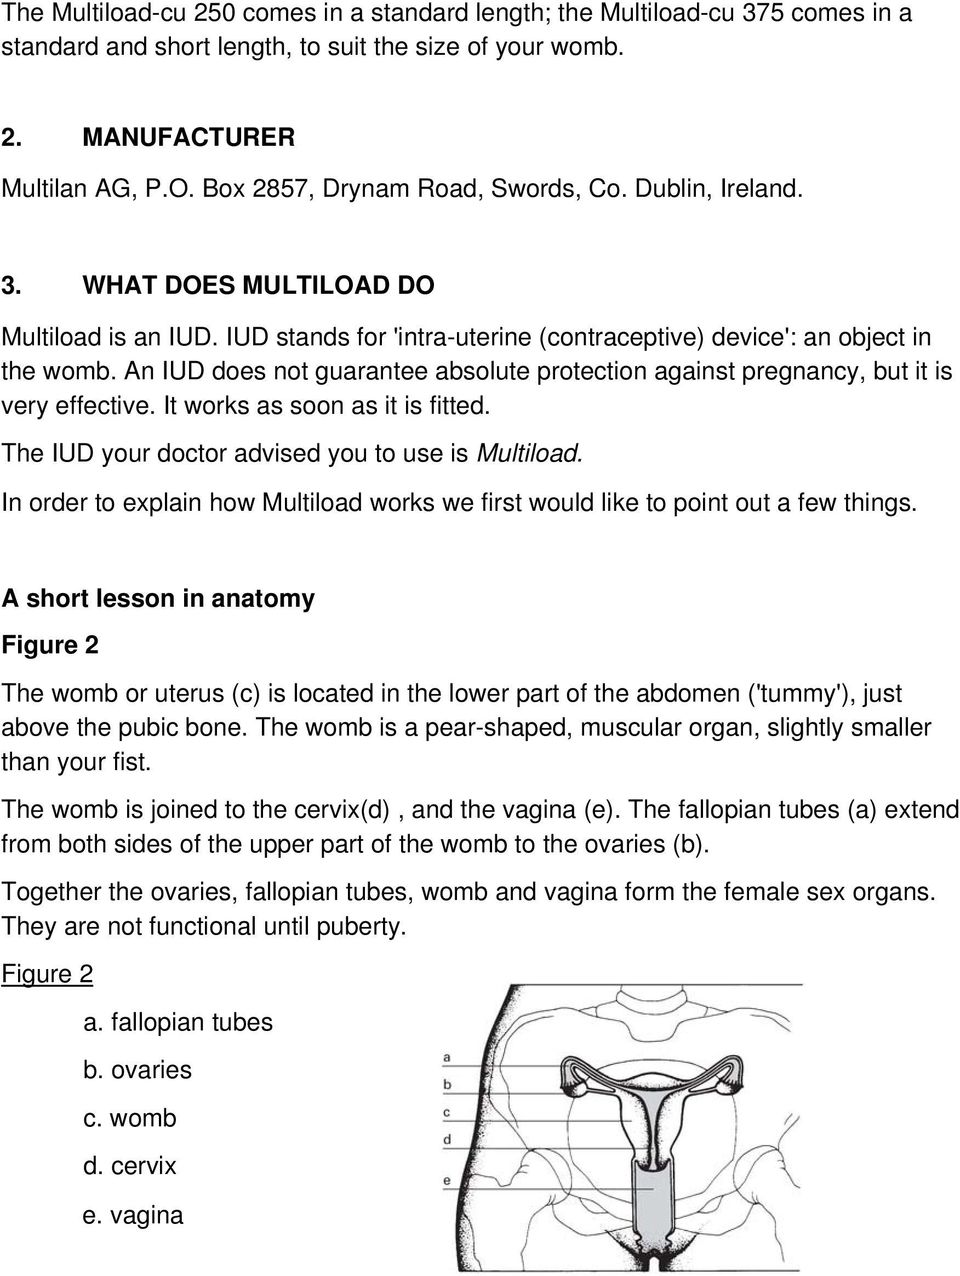 An IUD does not guarantee absolute protection against pregnancy, but it is very effective. It works as soon as it is fitted. The IUD your doctor advised you to use is Multiload.